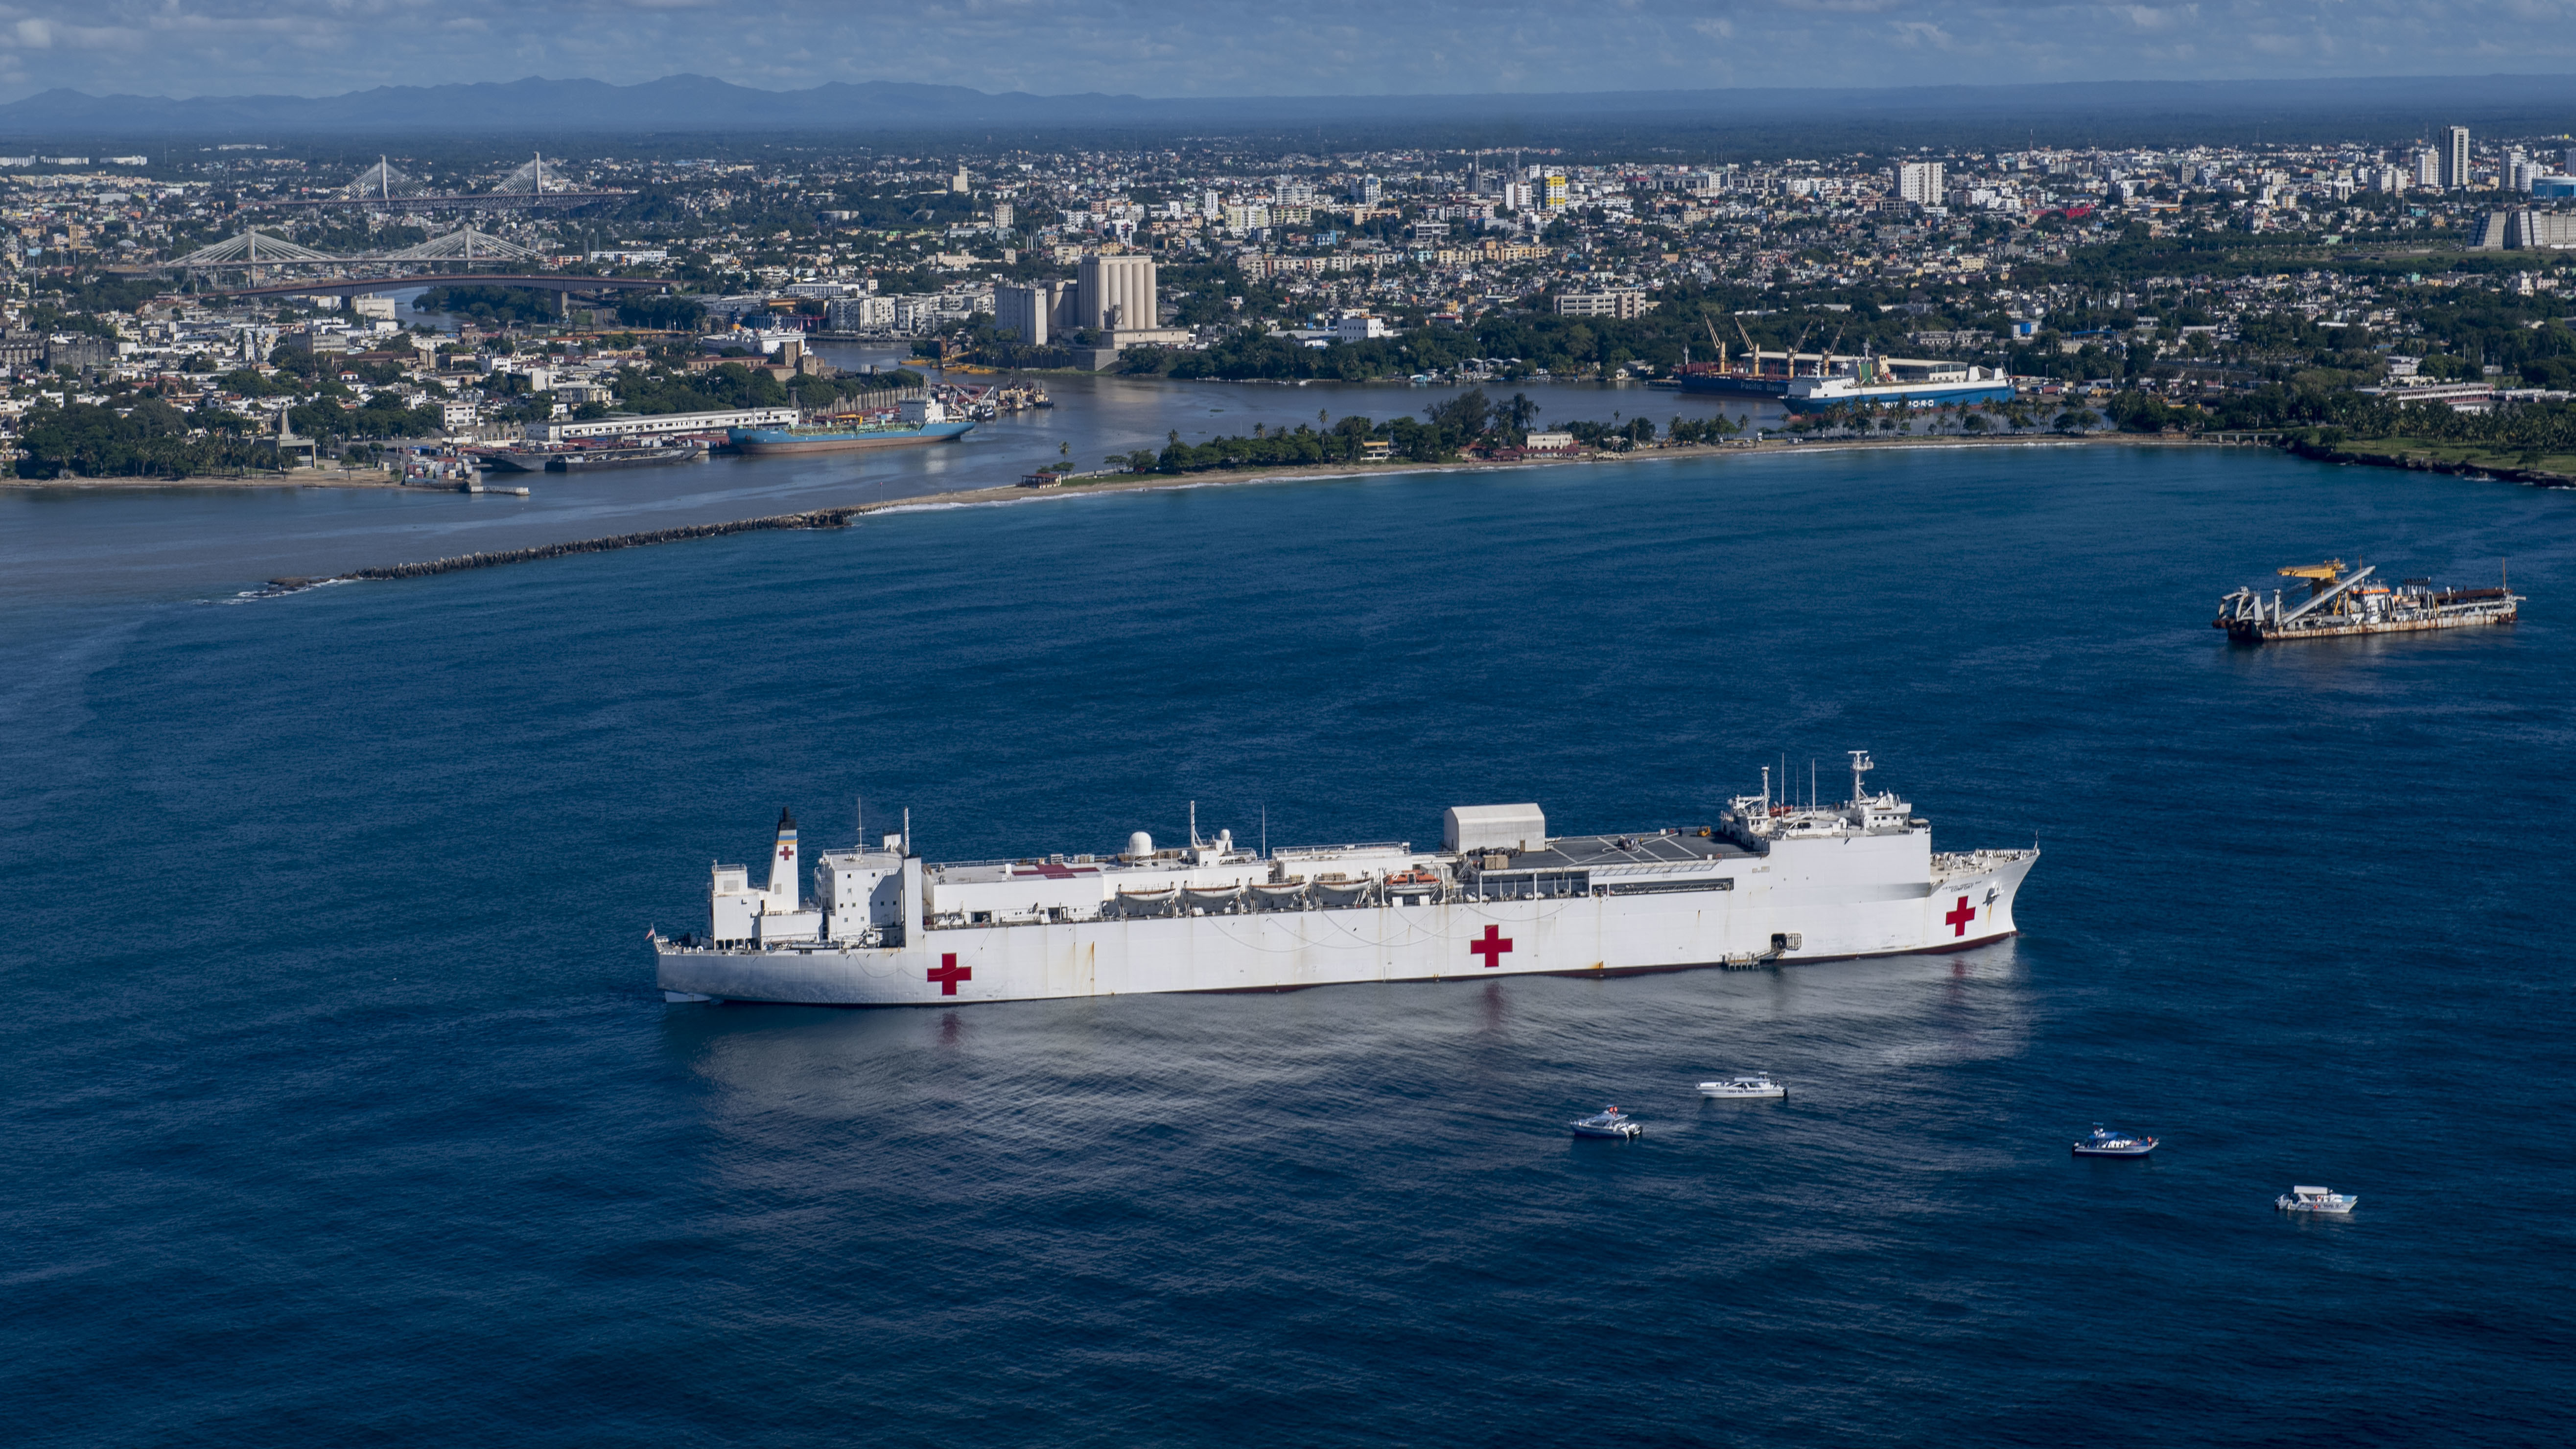 221127-N-DF135-1022 SANTO DOMINGO, Dominican Republic (Nov. 27, 2022) – The hospital ship USNS Comfort (T-AH 20) sits anchored in the harbor of Santo Domingo, Dominican Republic on Nov. 27, 2022. Comfort is deployed to U.S. 4th Fleet in support of Continuing Promise 2022, a humanitarian assistance and goodwill mission conducting direct medical care, expeditionary veterinary care, and subject matter expert exchanges with five partner nations in the Caribbean, Central and South America. (U.S. Navy photo by Mass Communication Specialist 3rd Class Deven Fernandez)